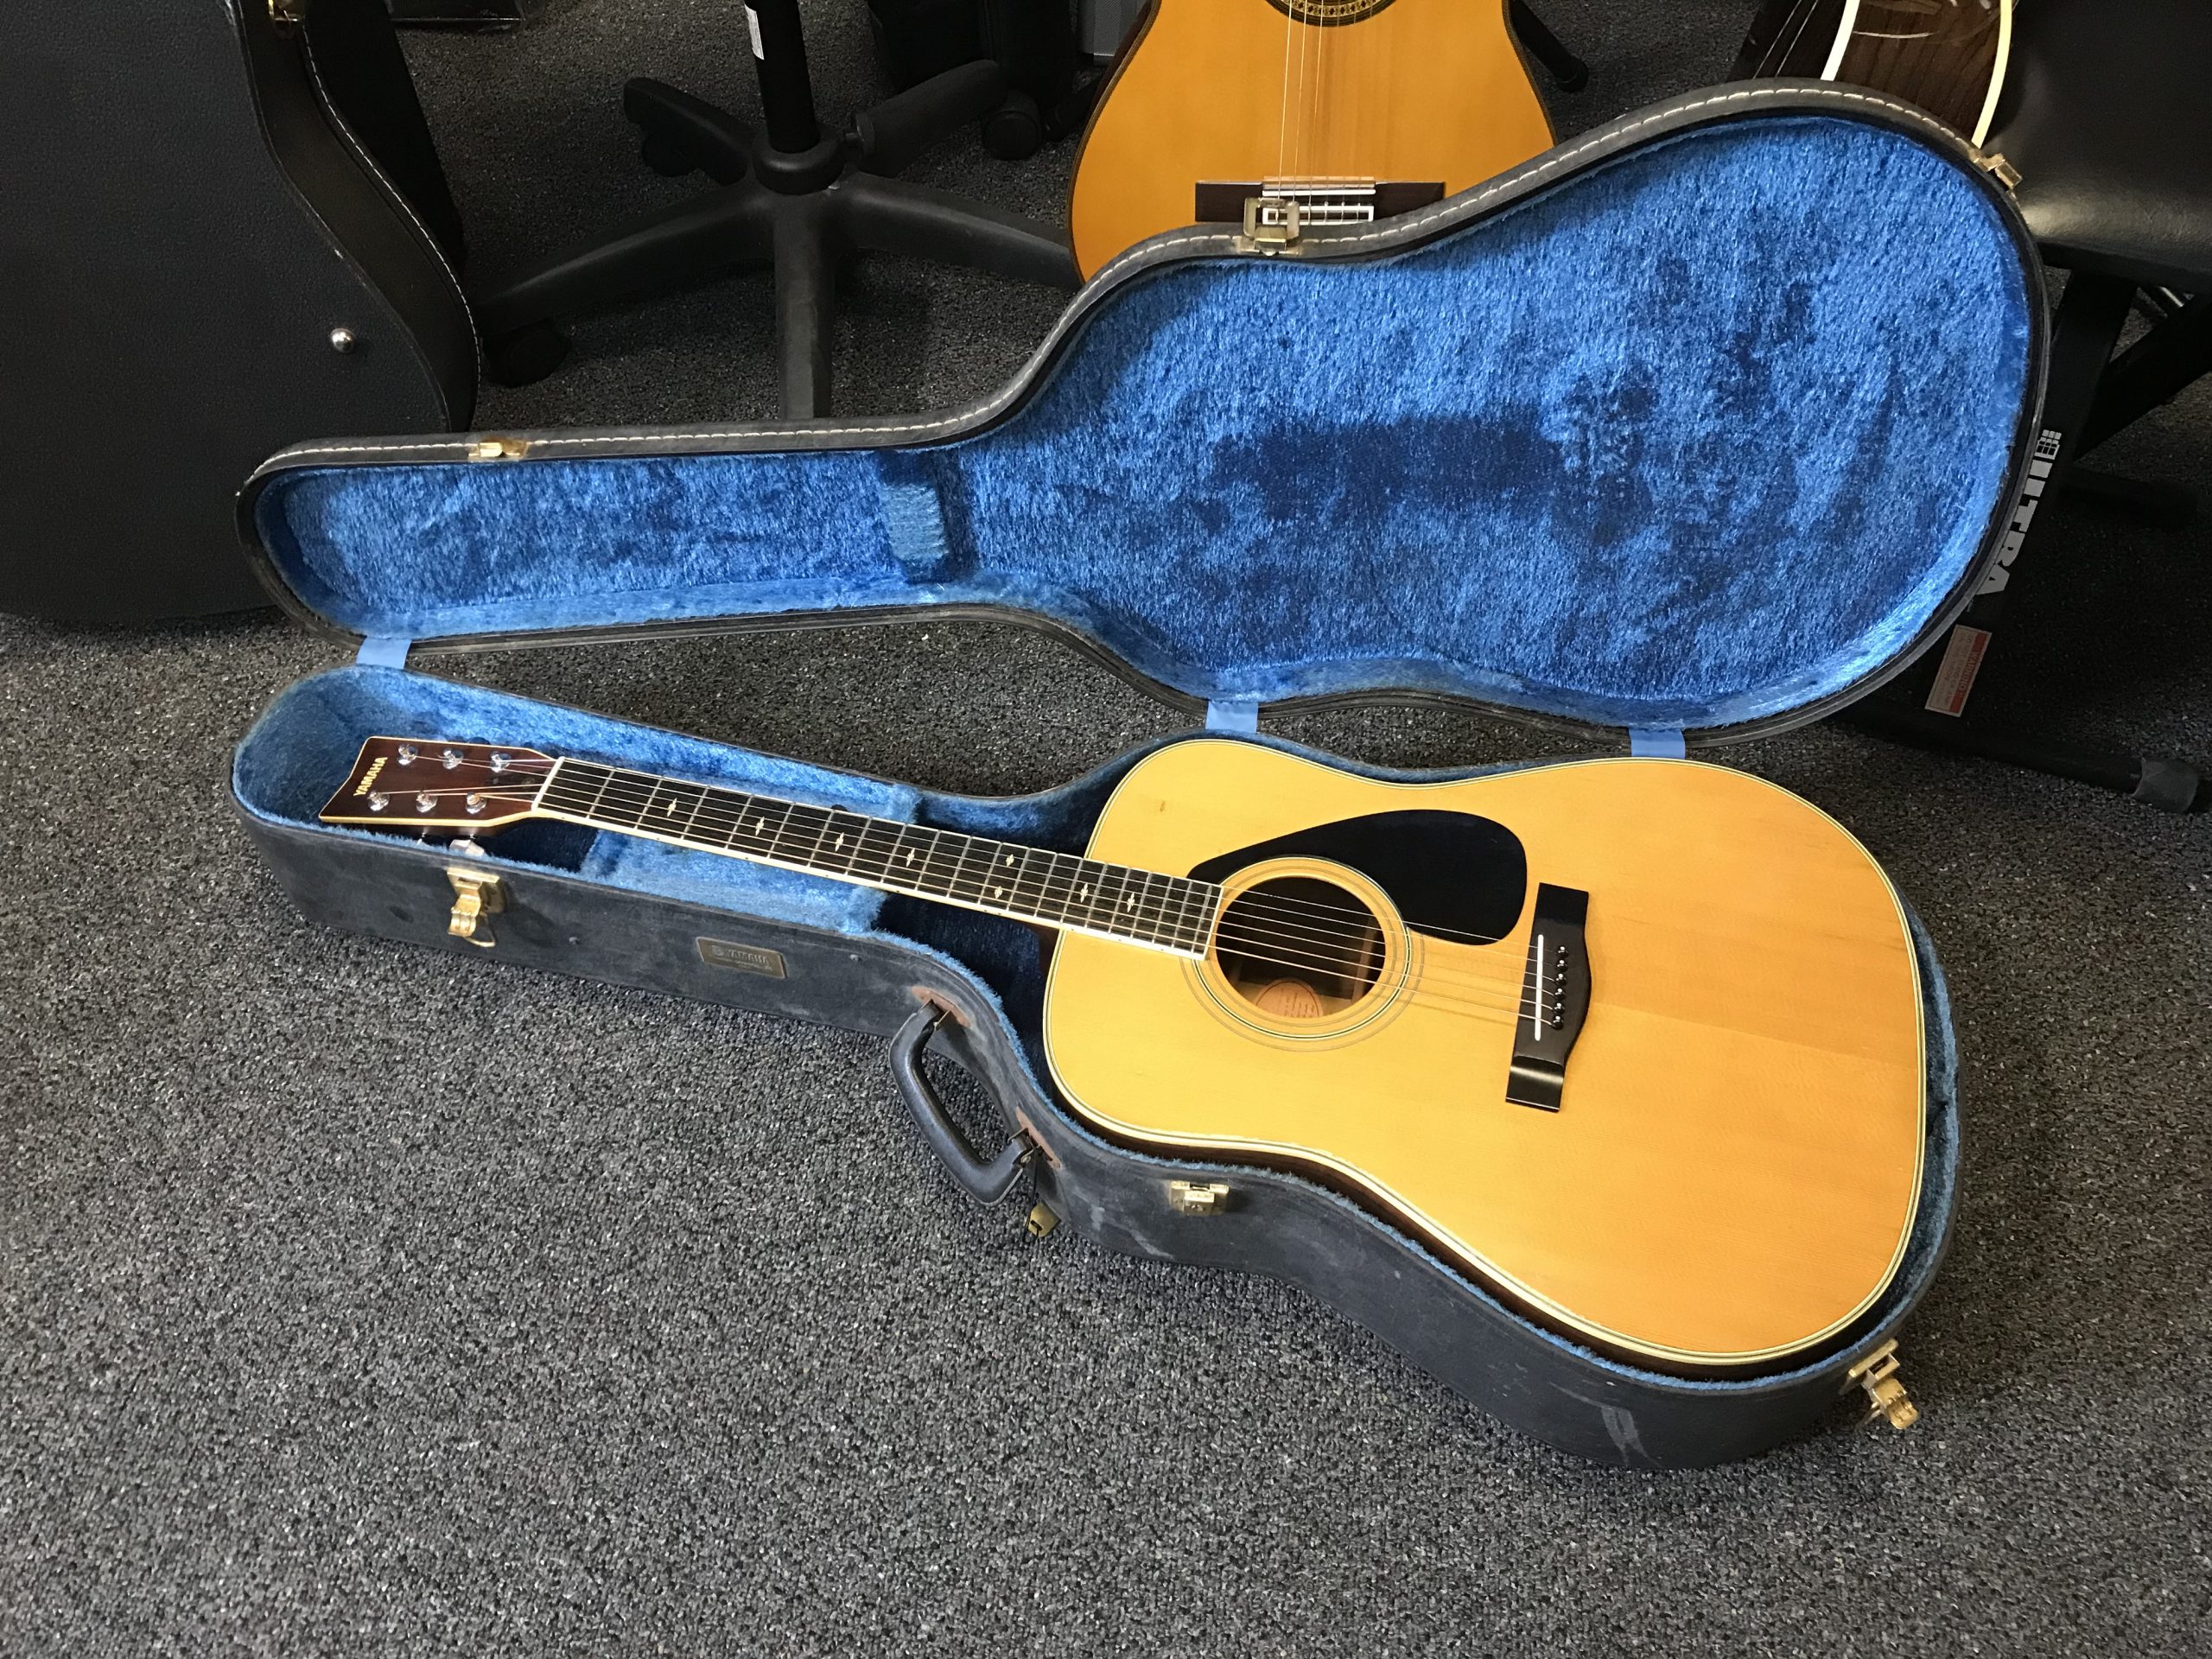 Yamaha FG-351B acoustic dreadnought guitar made in Japan 1980 in excellent  condition with original Yamaha hard case.